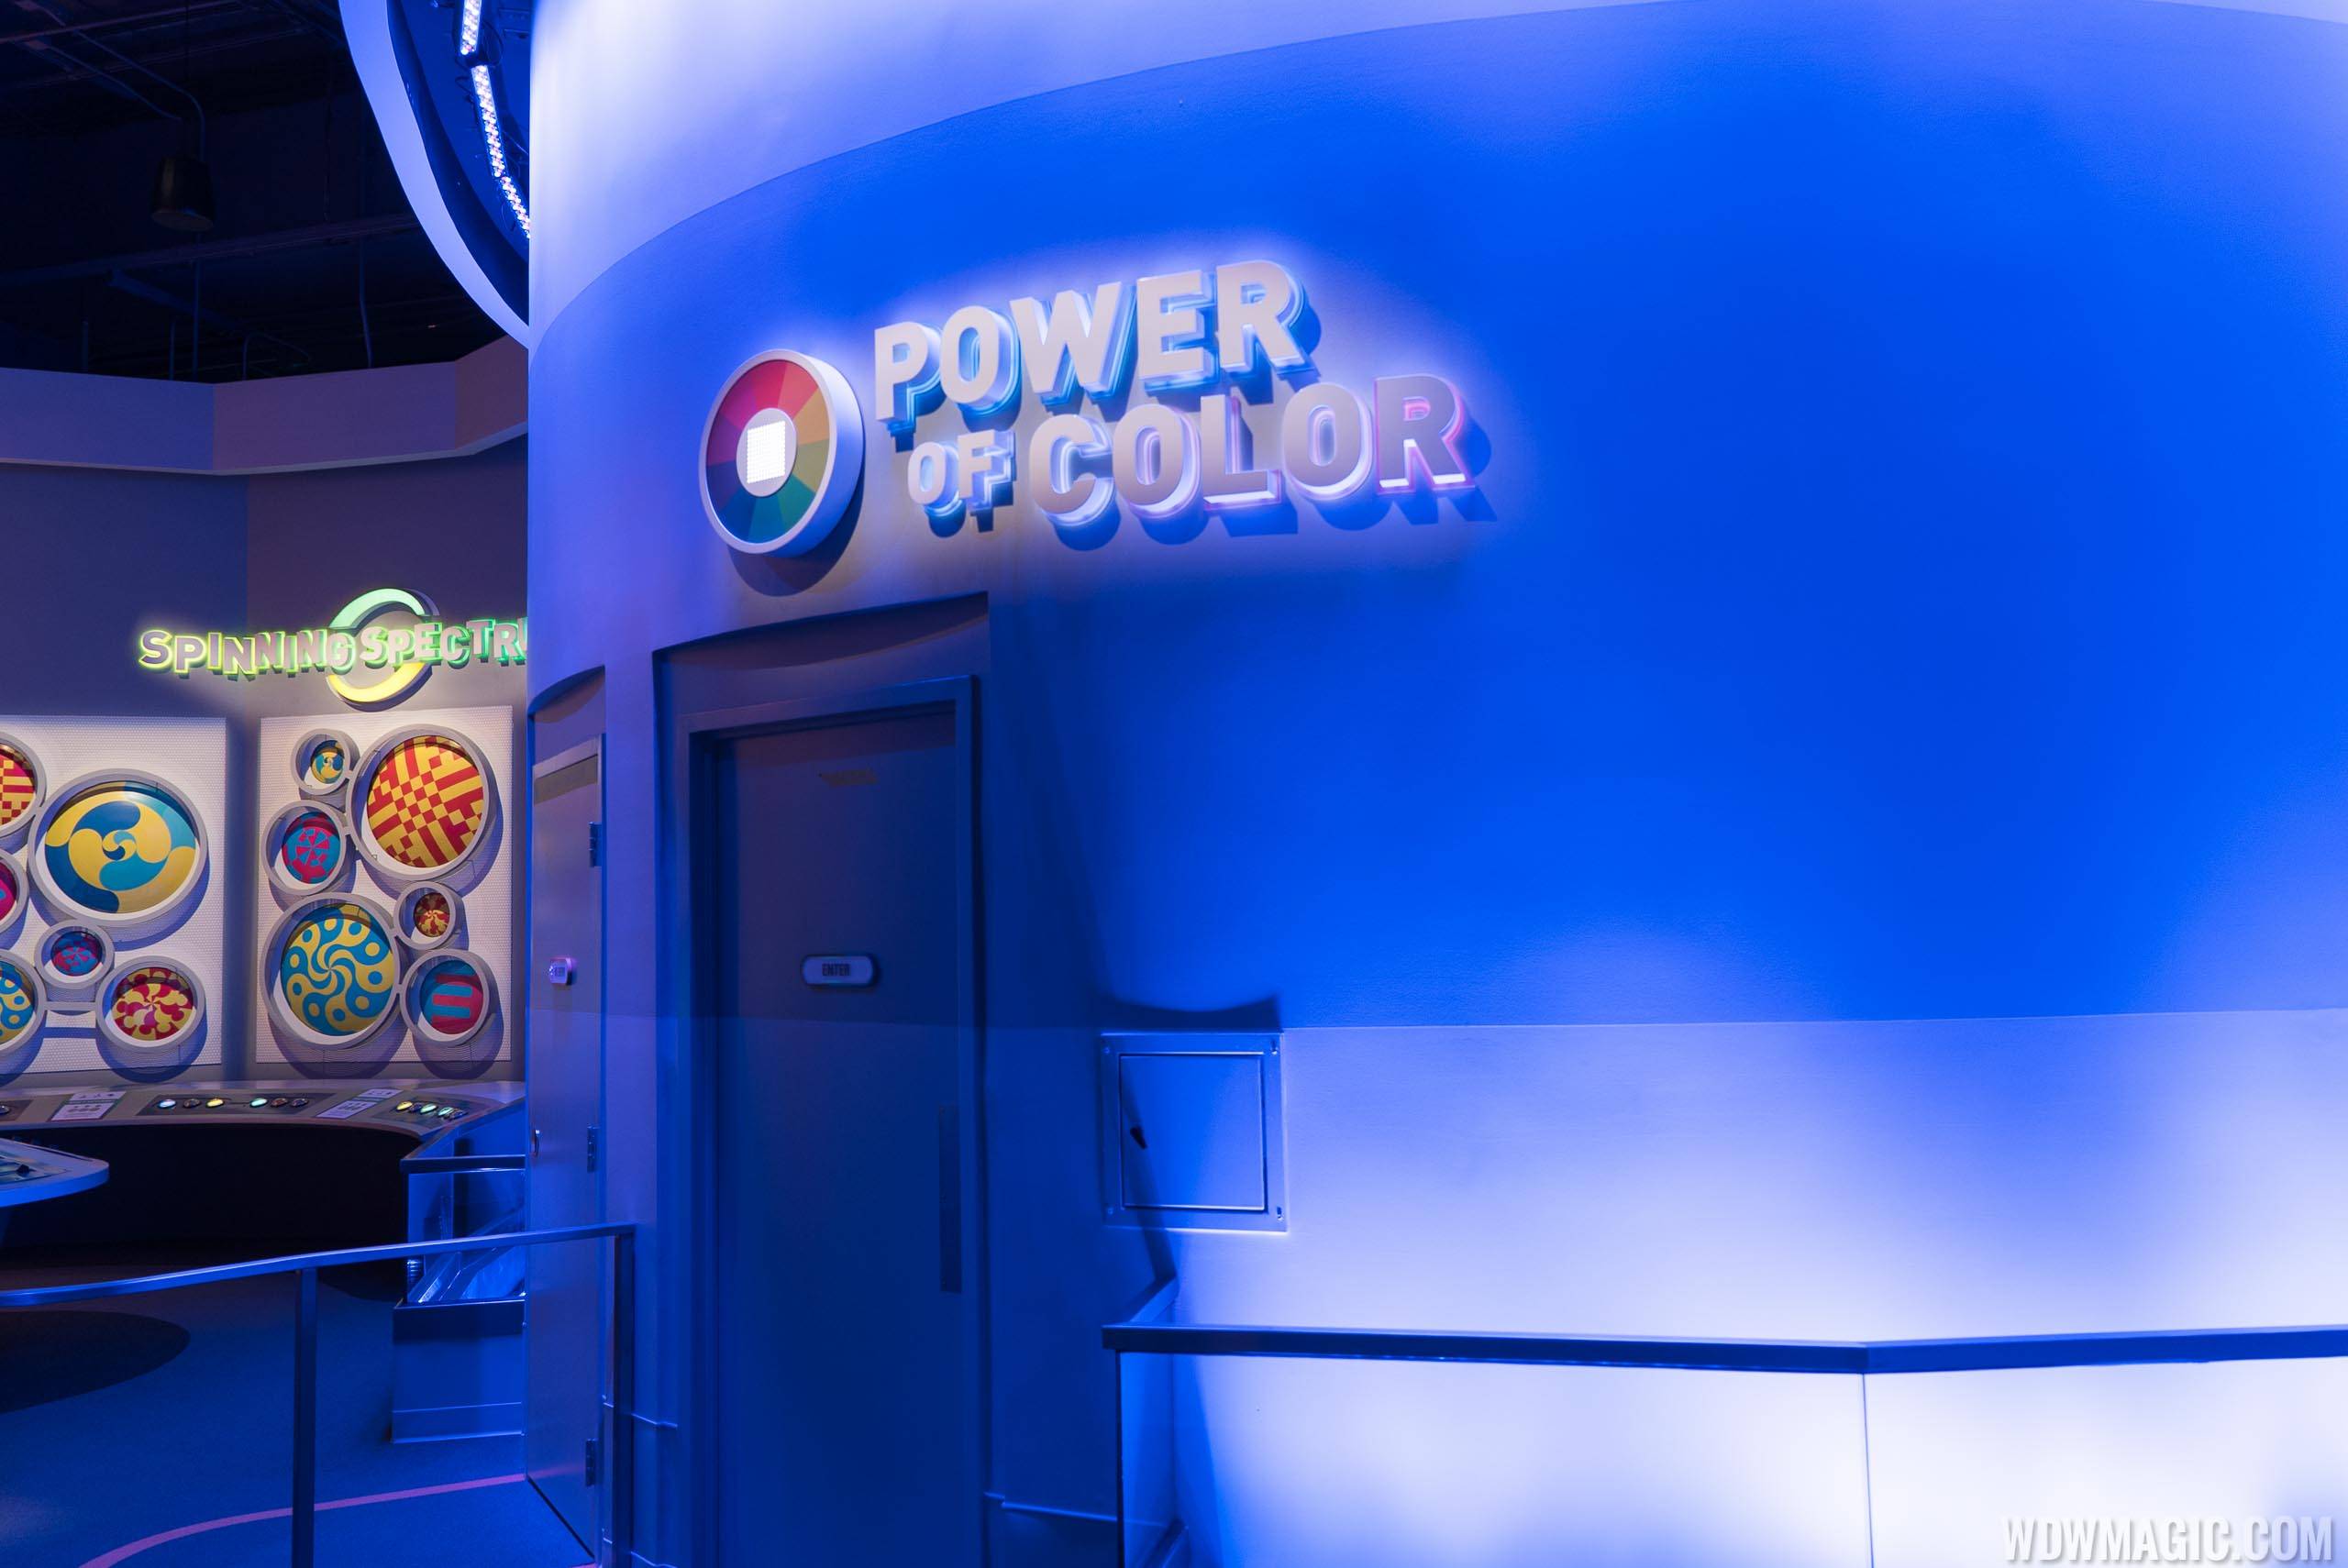 The Power of Color Theater